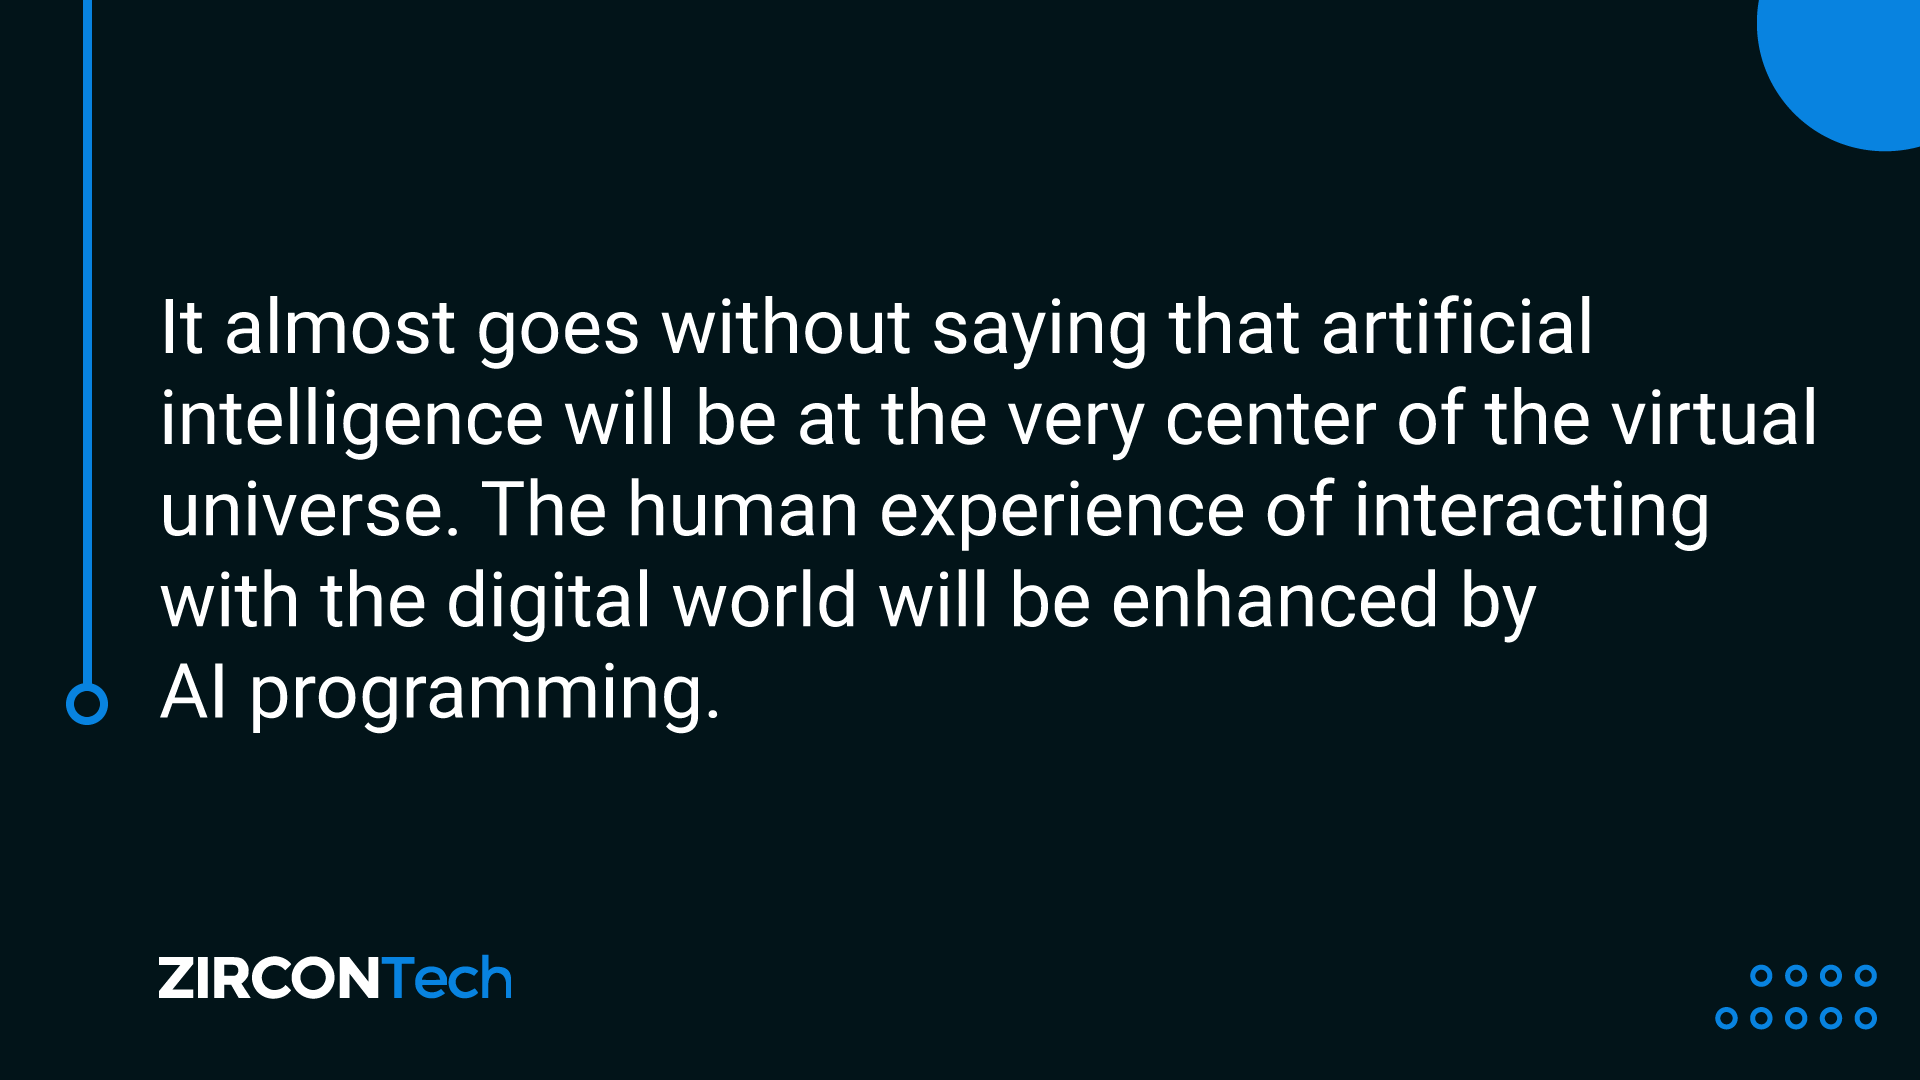 AI - artificial intelligente - will be the center of the virtual universe